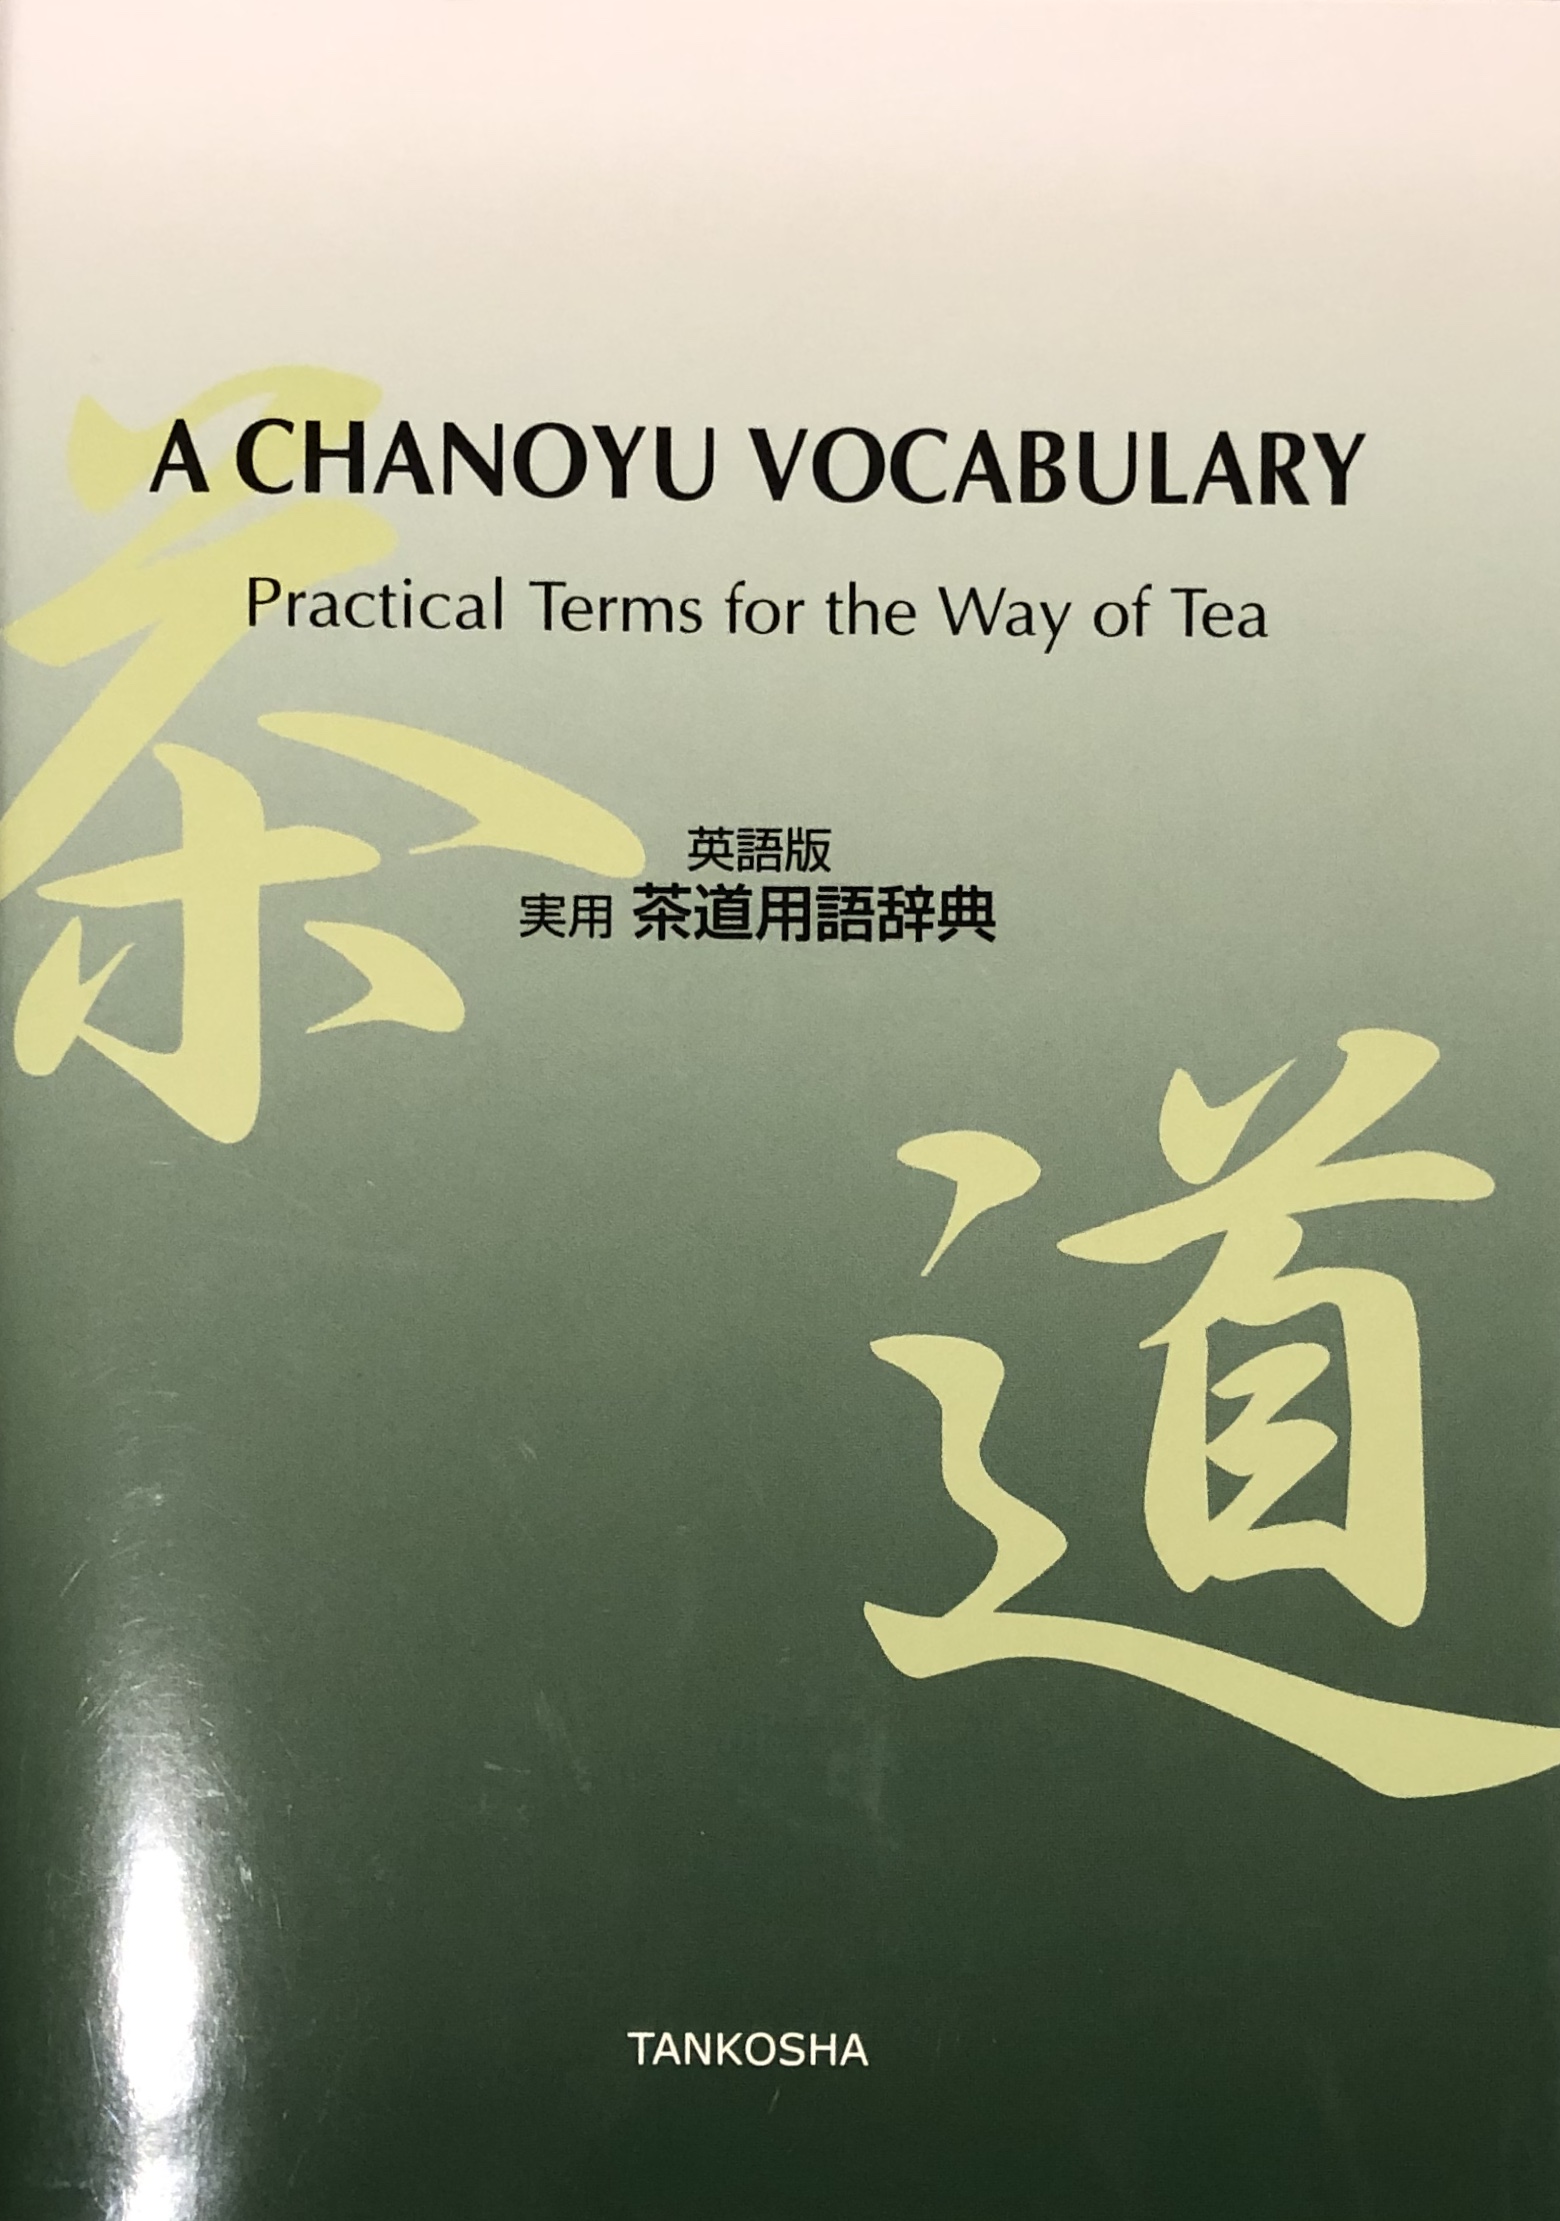 A CHANOYU VOCABULARY: Practical Terms for the Way of Tea